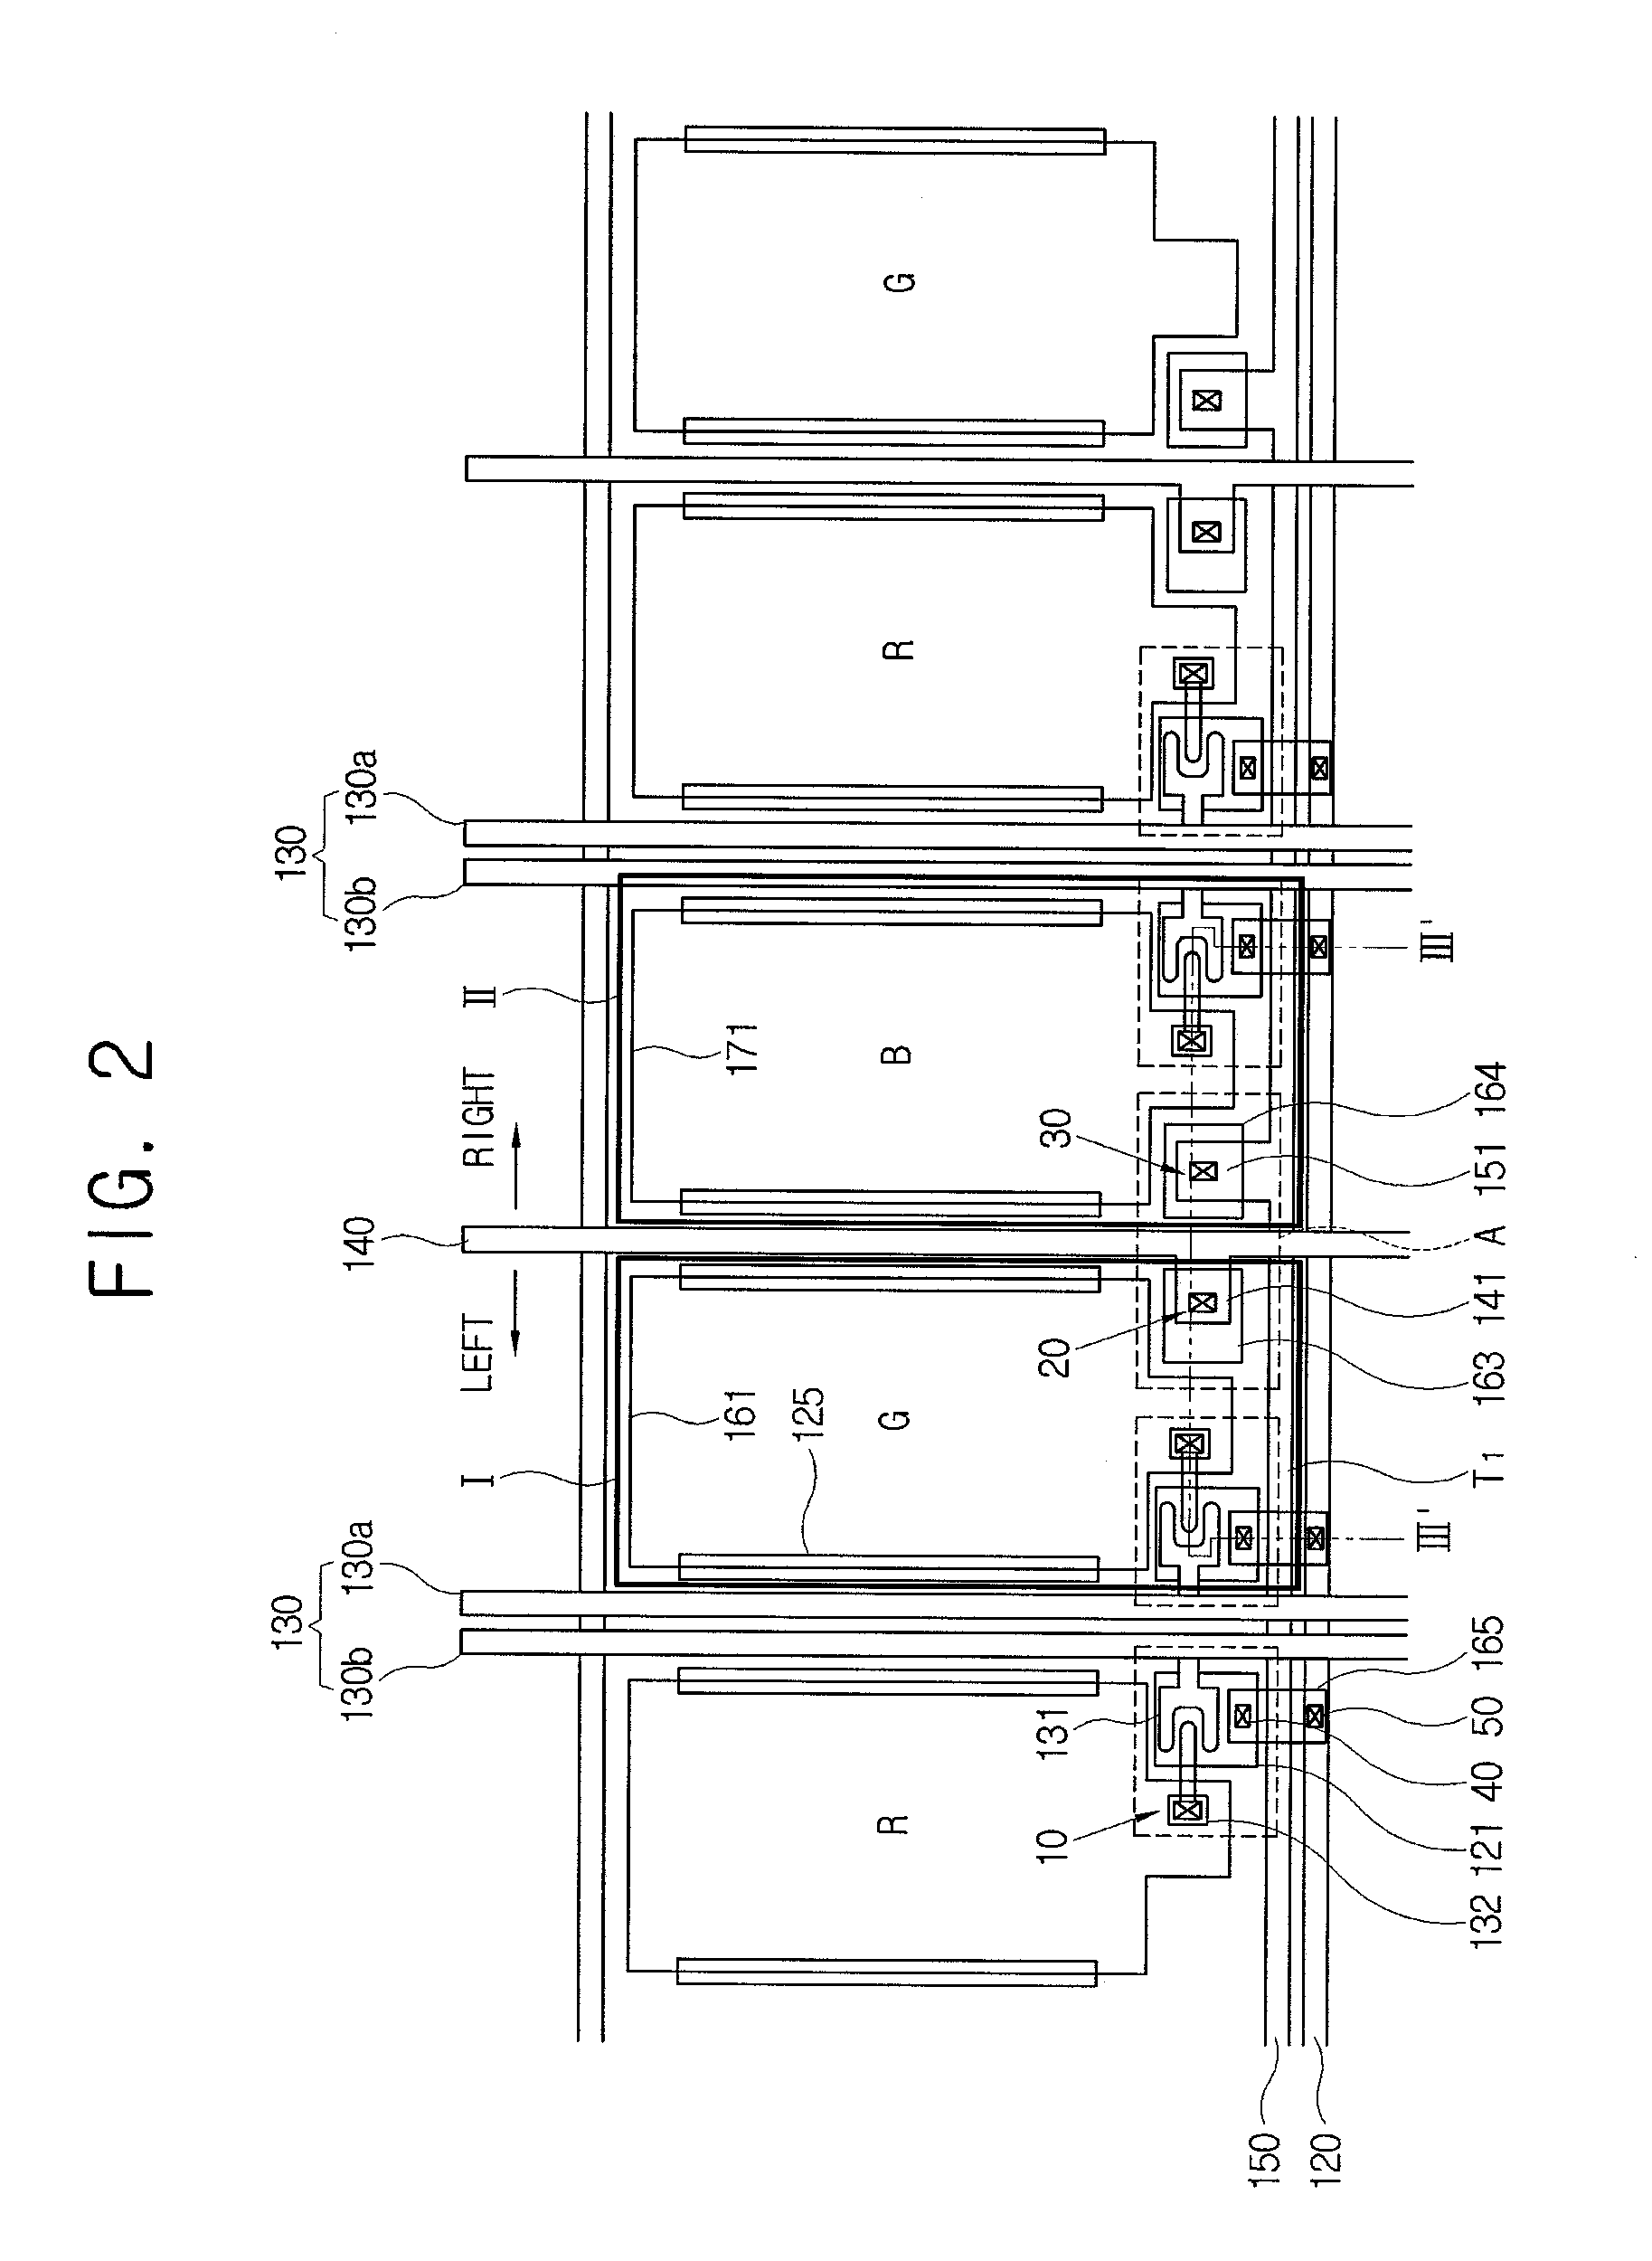 Touch panel with improved reliability and display device employing the touch panel